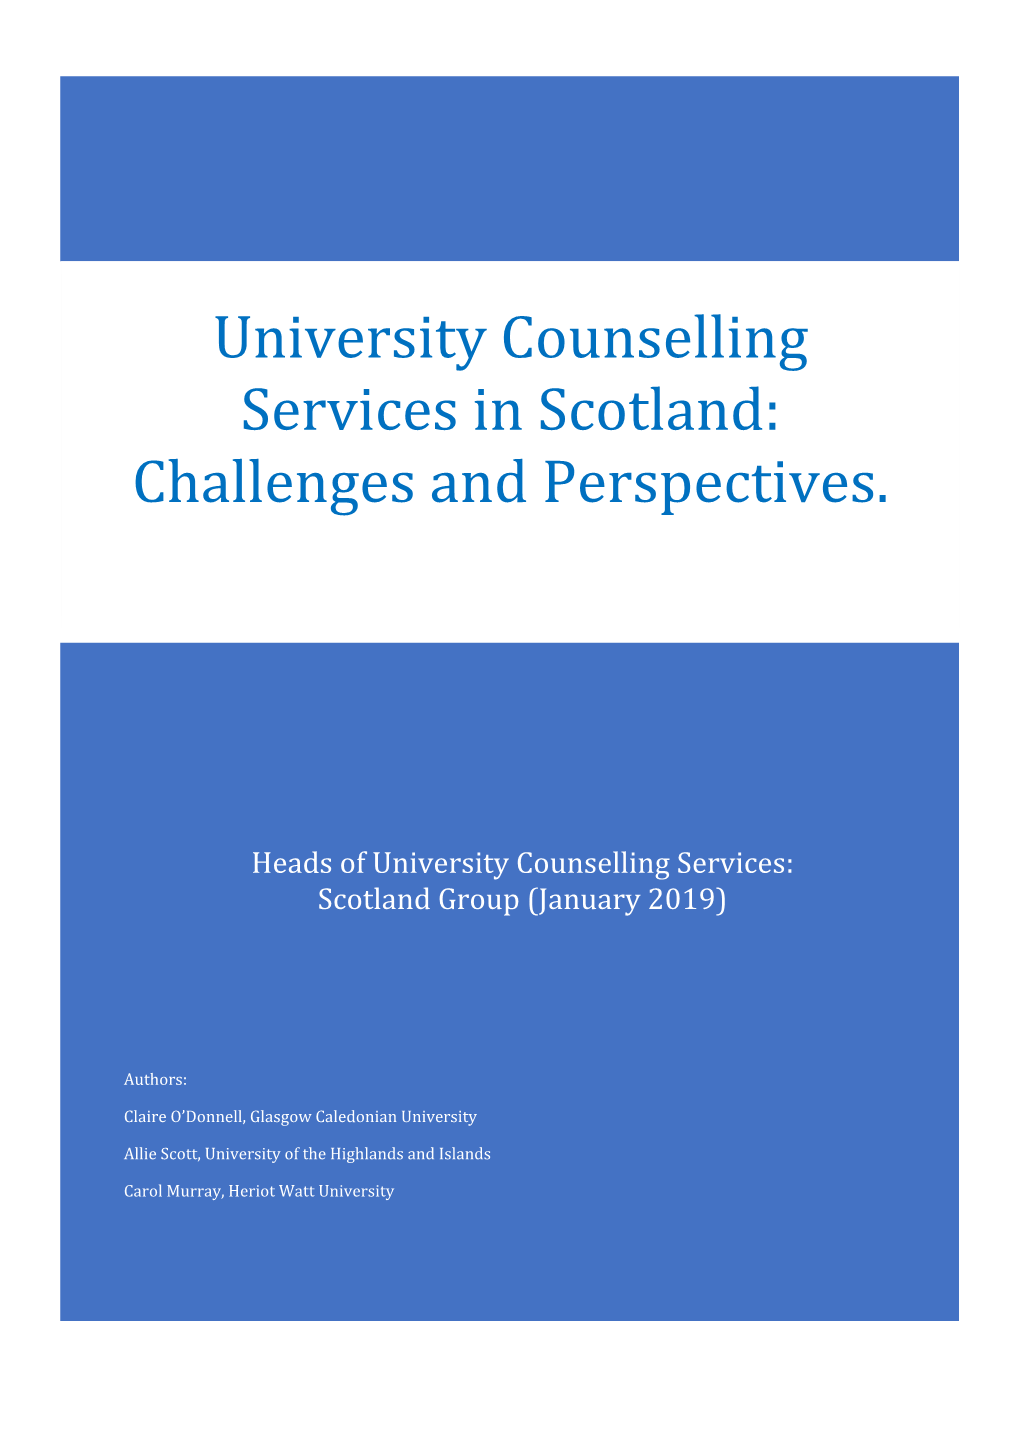 University Counselling Services in Scotland: Challenges and Perspectives